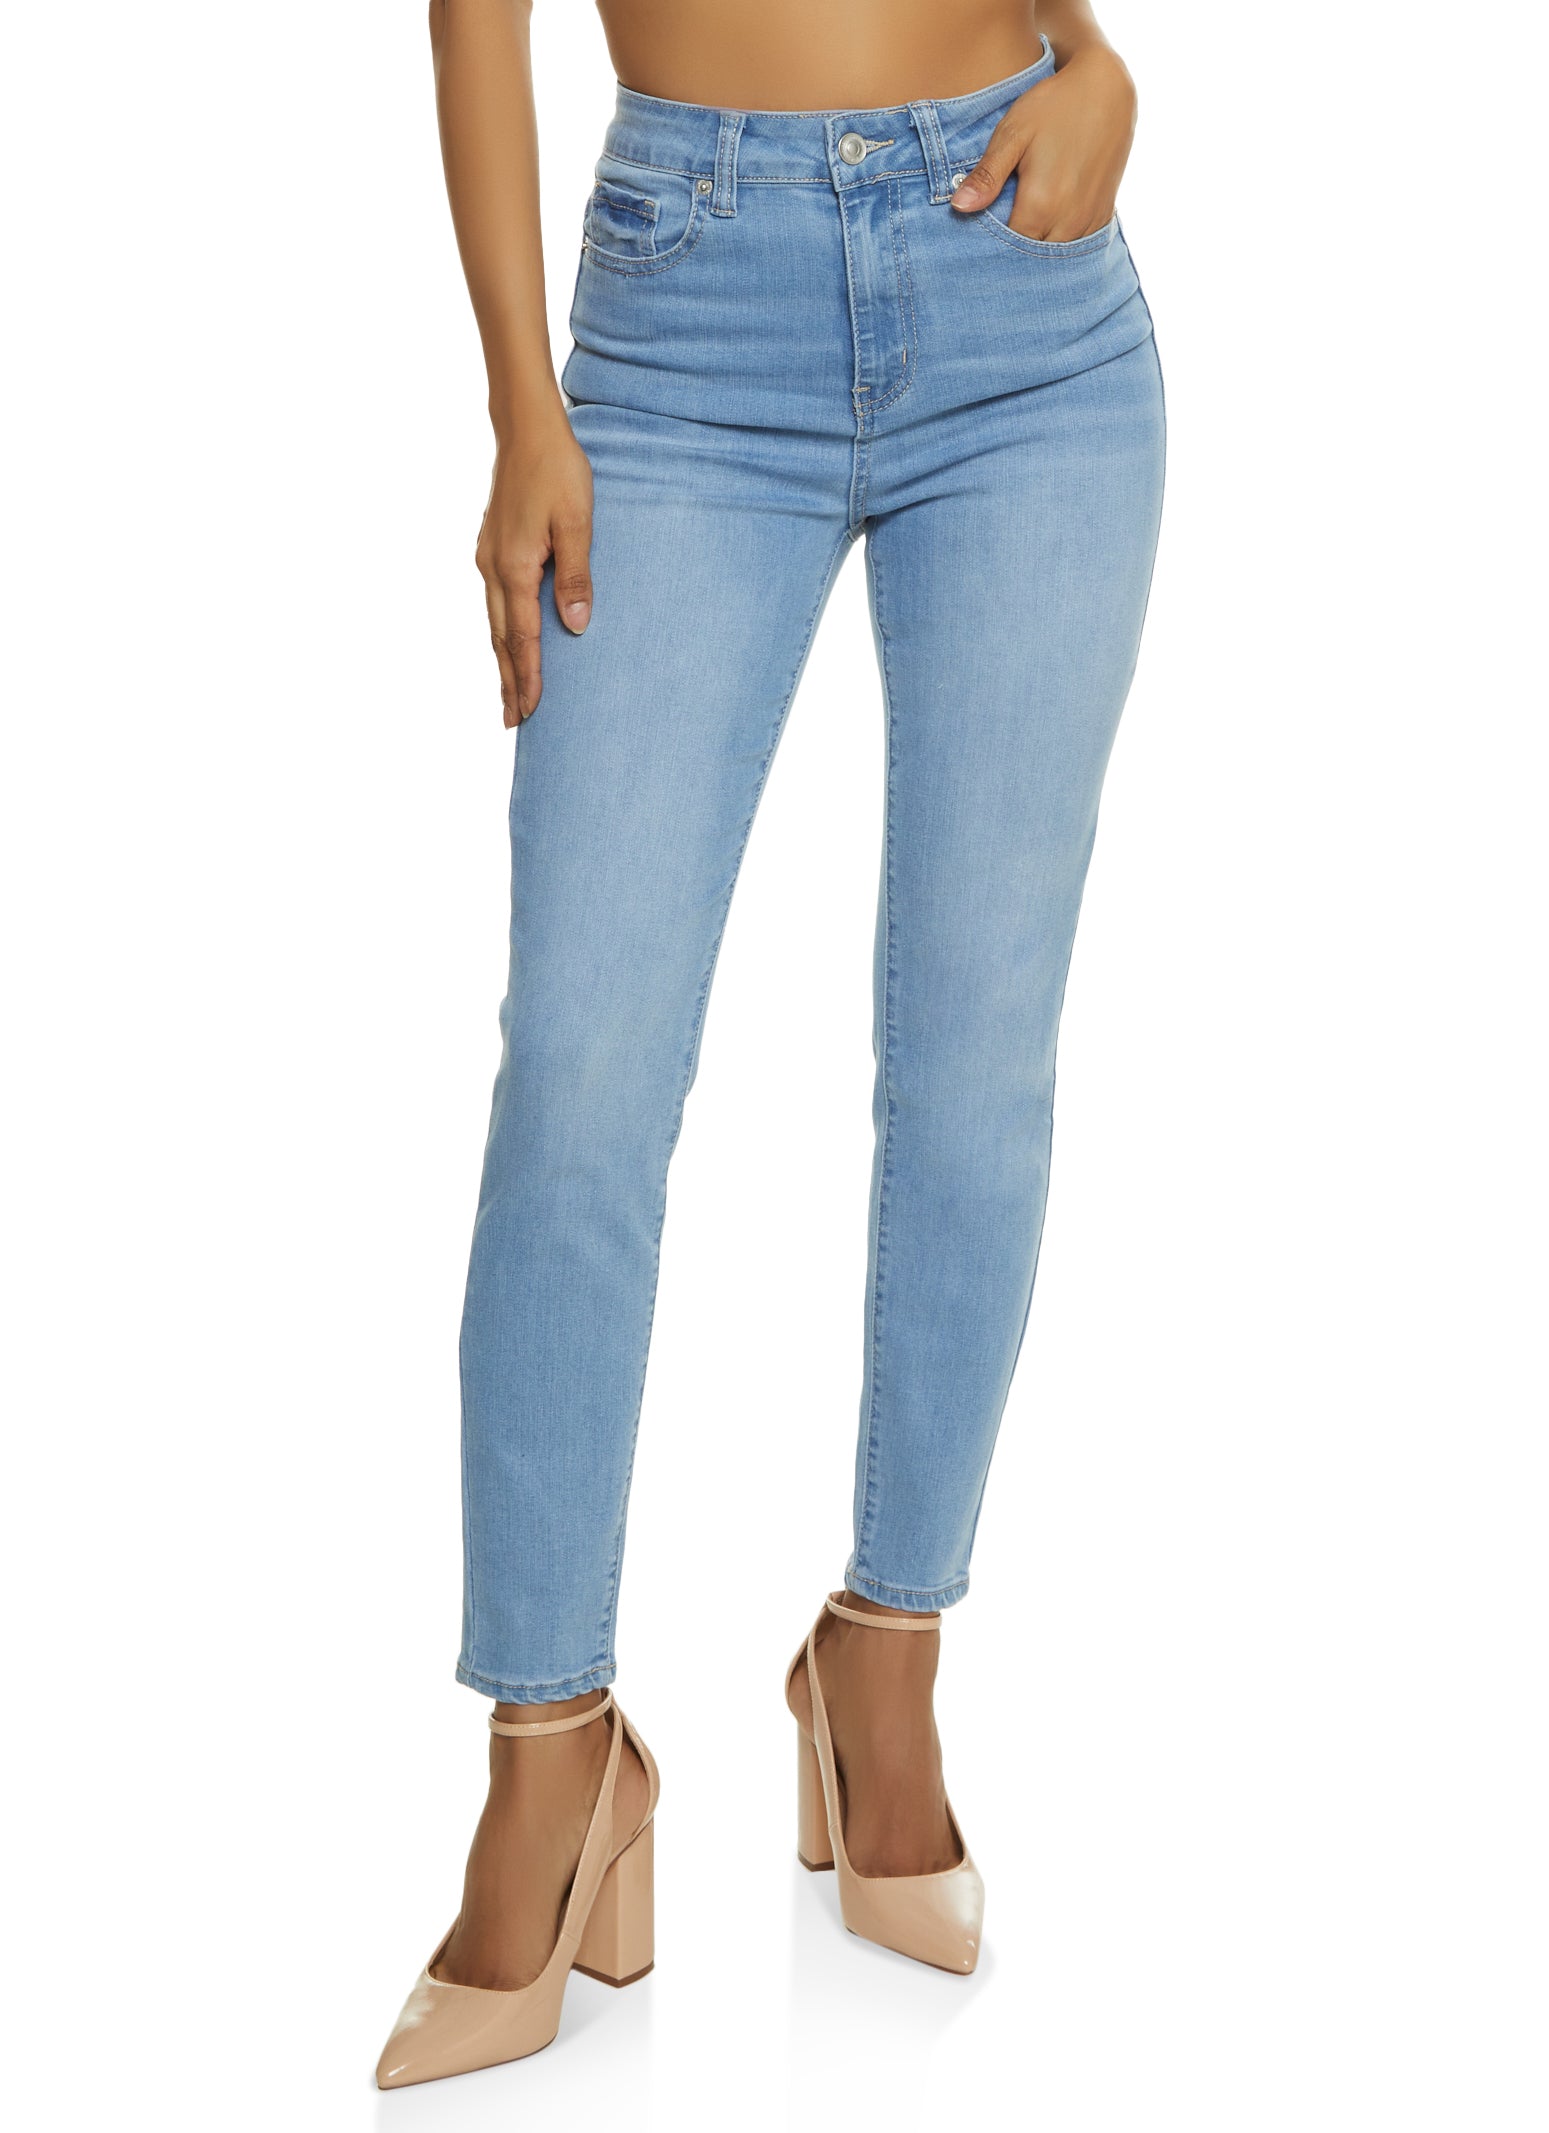 Buy Womens Jeans High Waisted Stretch Flare Light Blue Wash Denim Jeans  Pants for Women Gift for Women Online in India 